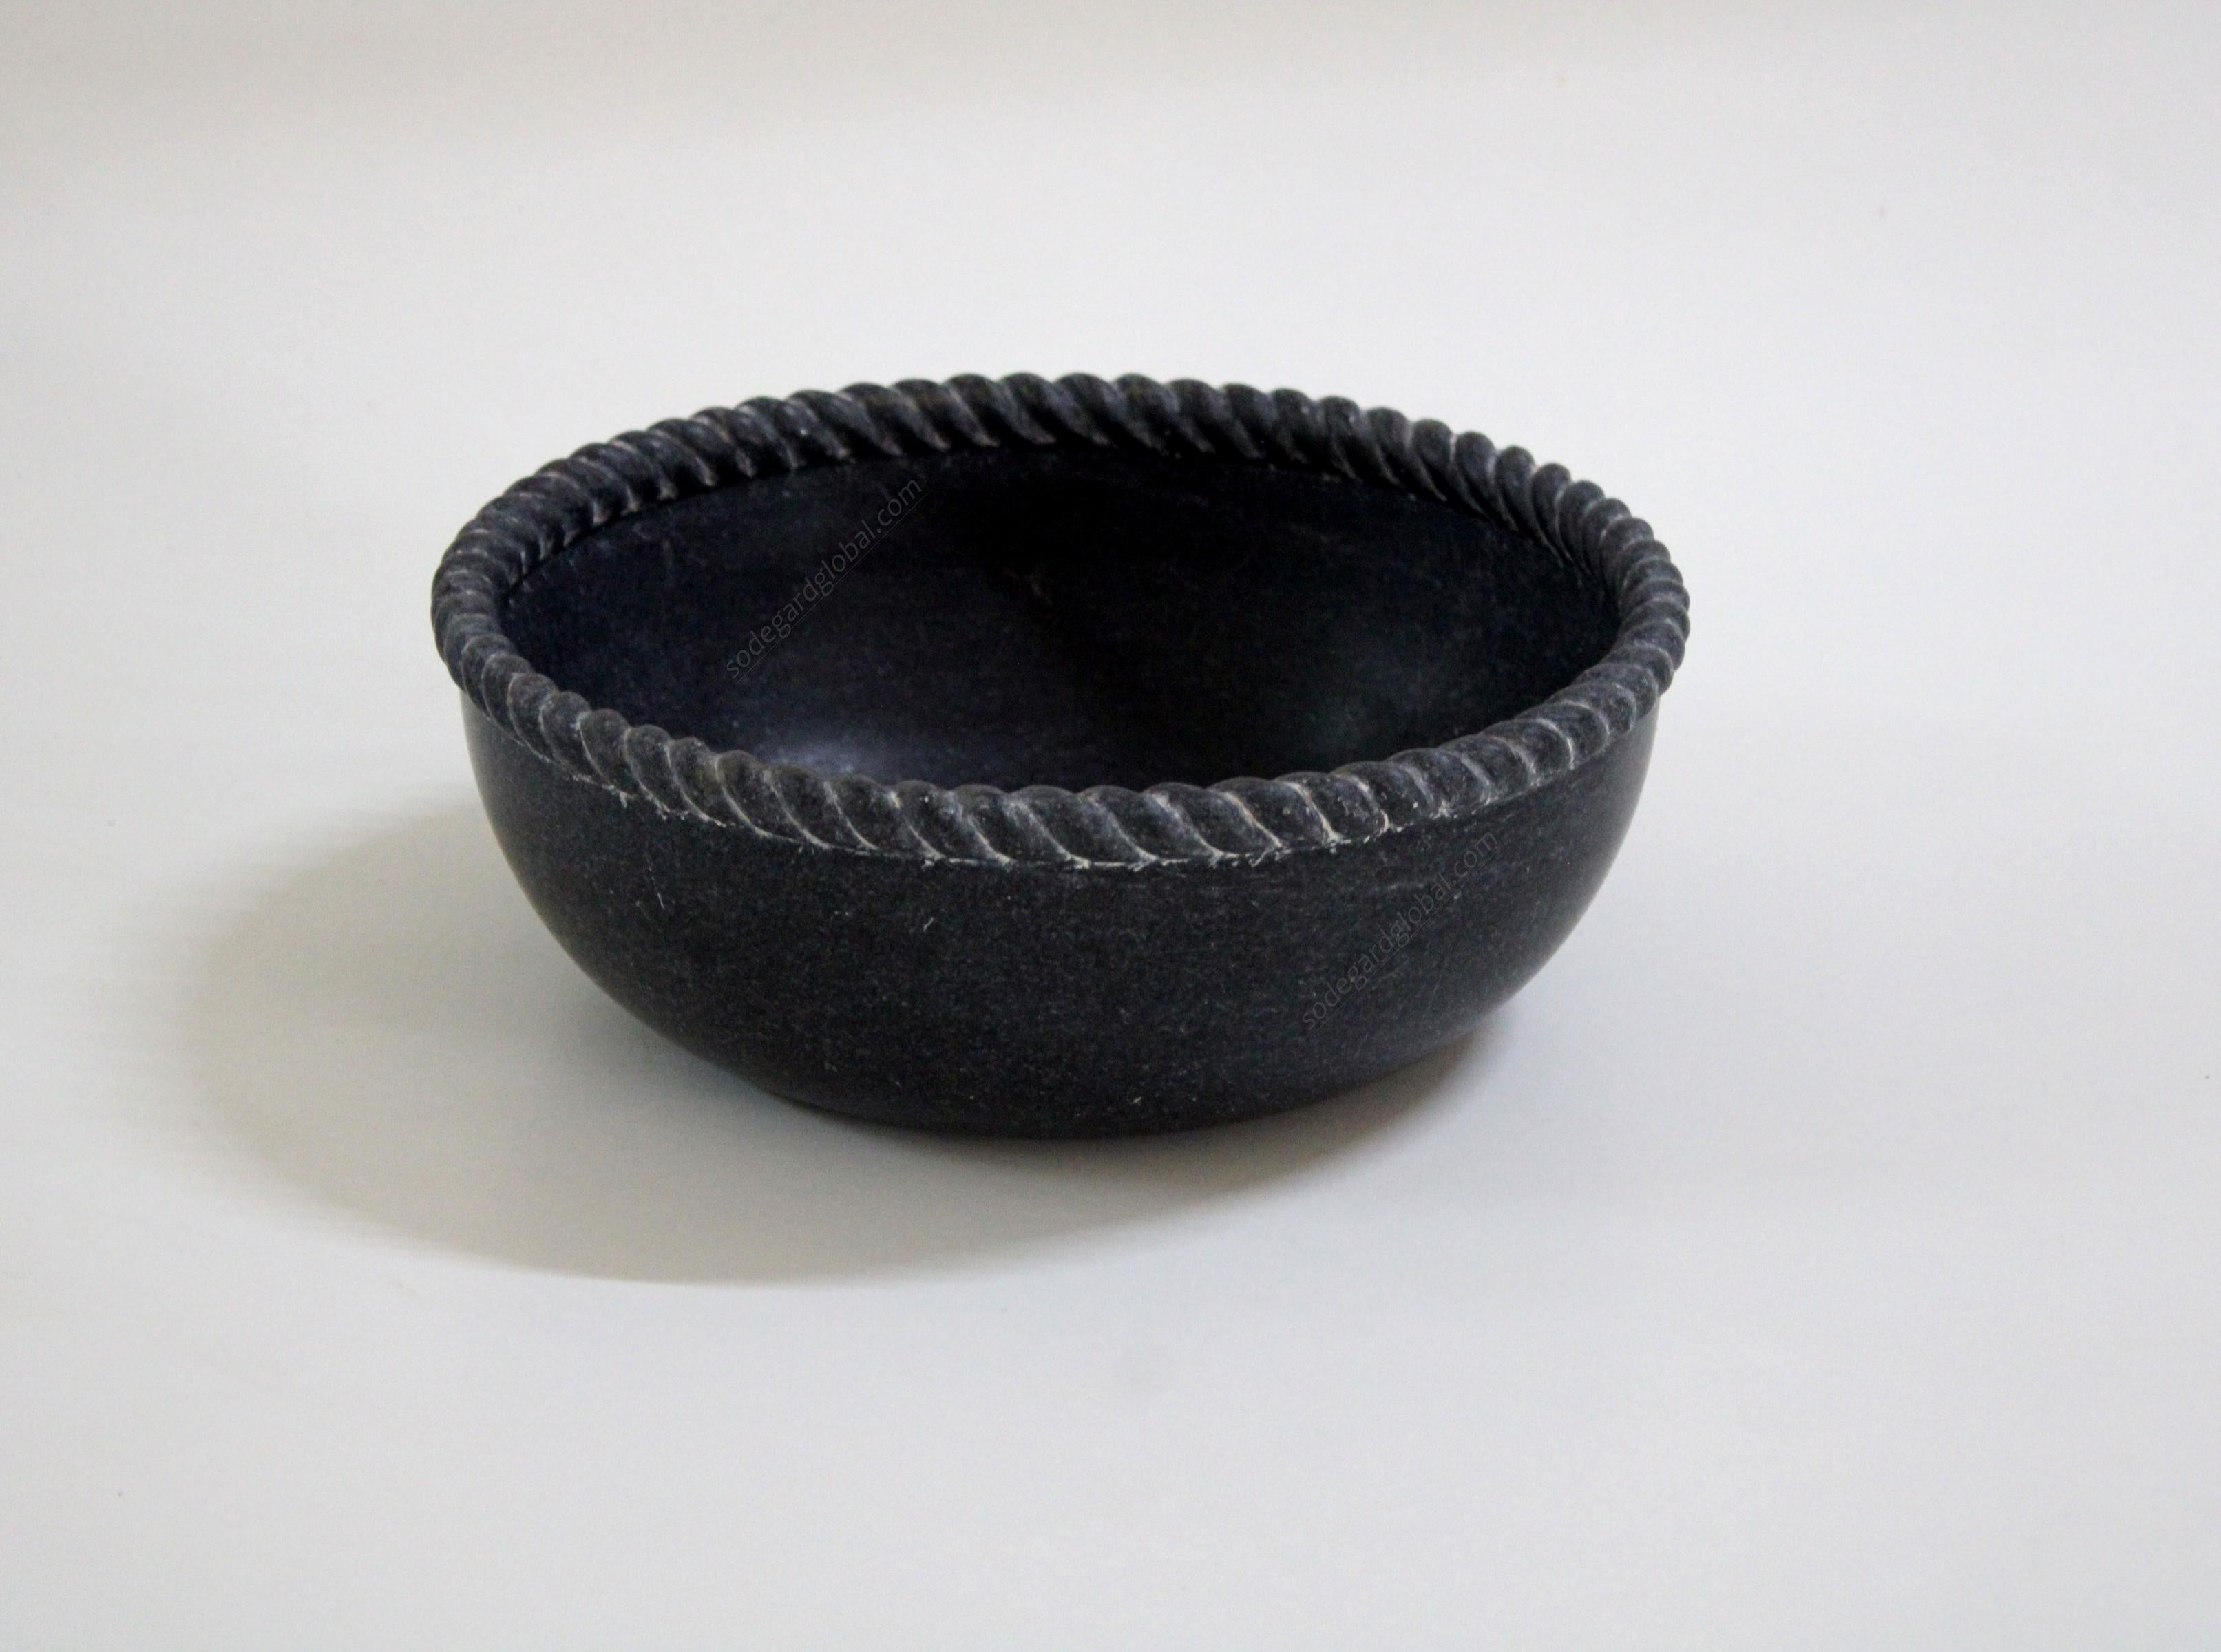 Sculpted out of a single block of marble with a delicately carved rope edge, perfect for a potpourri, a fruit bowl or just a key catch.


Round Rope Bowl in Black Marble
Size- 12” x 12” x 2” H
Materials - Black Marble, Hand-Carved


Buyer